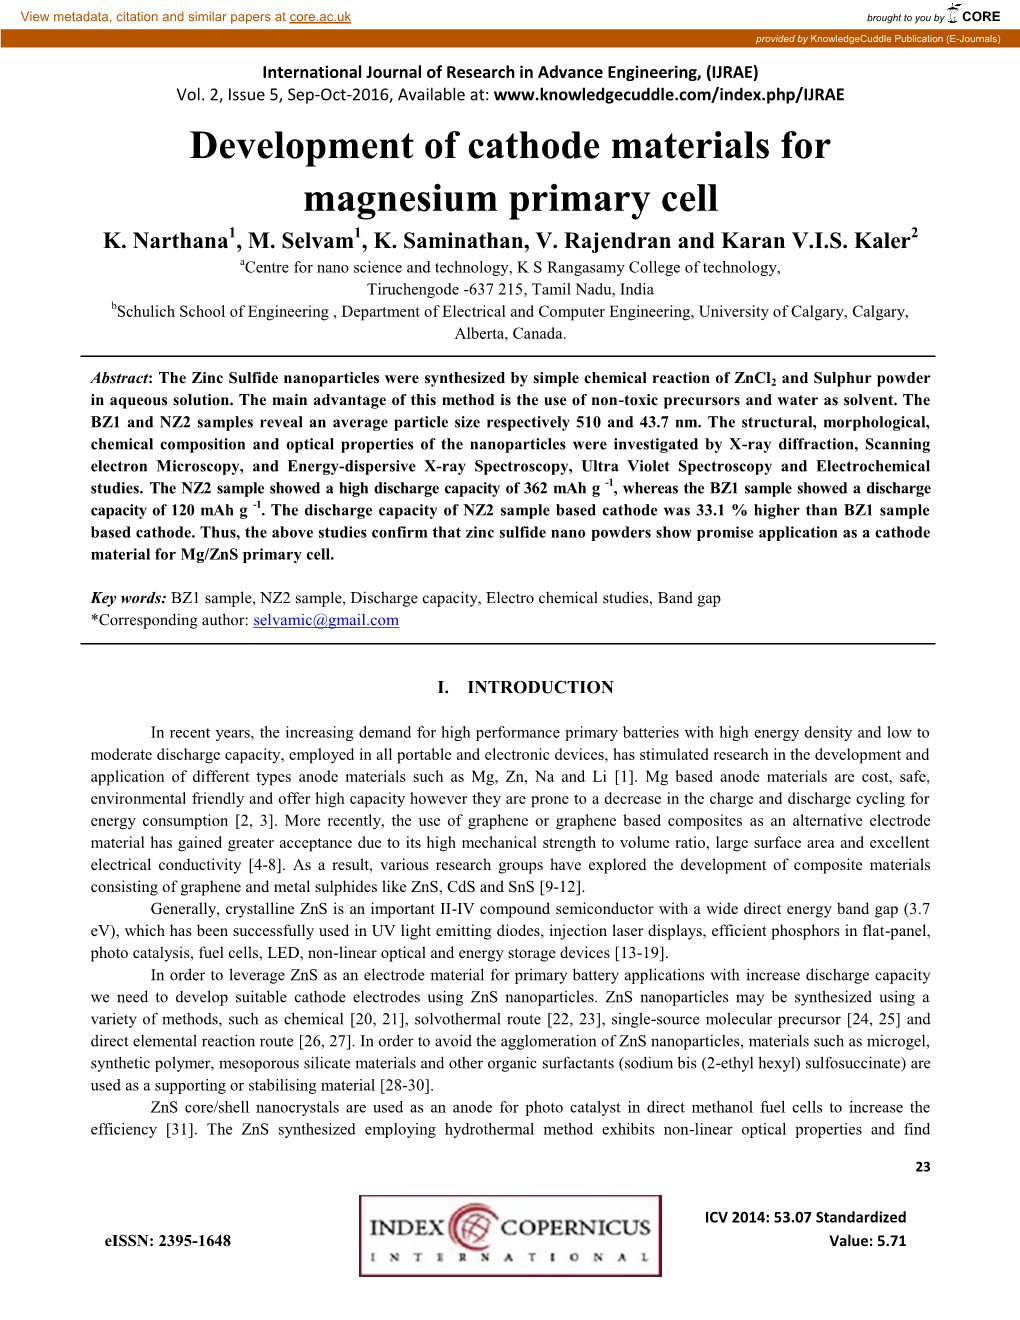 Development of Cathode Materials for Magnesium Primary Cell K